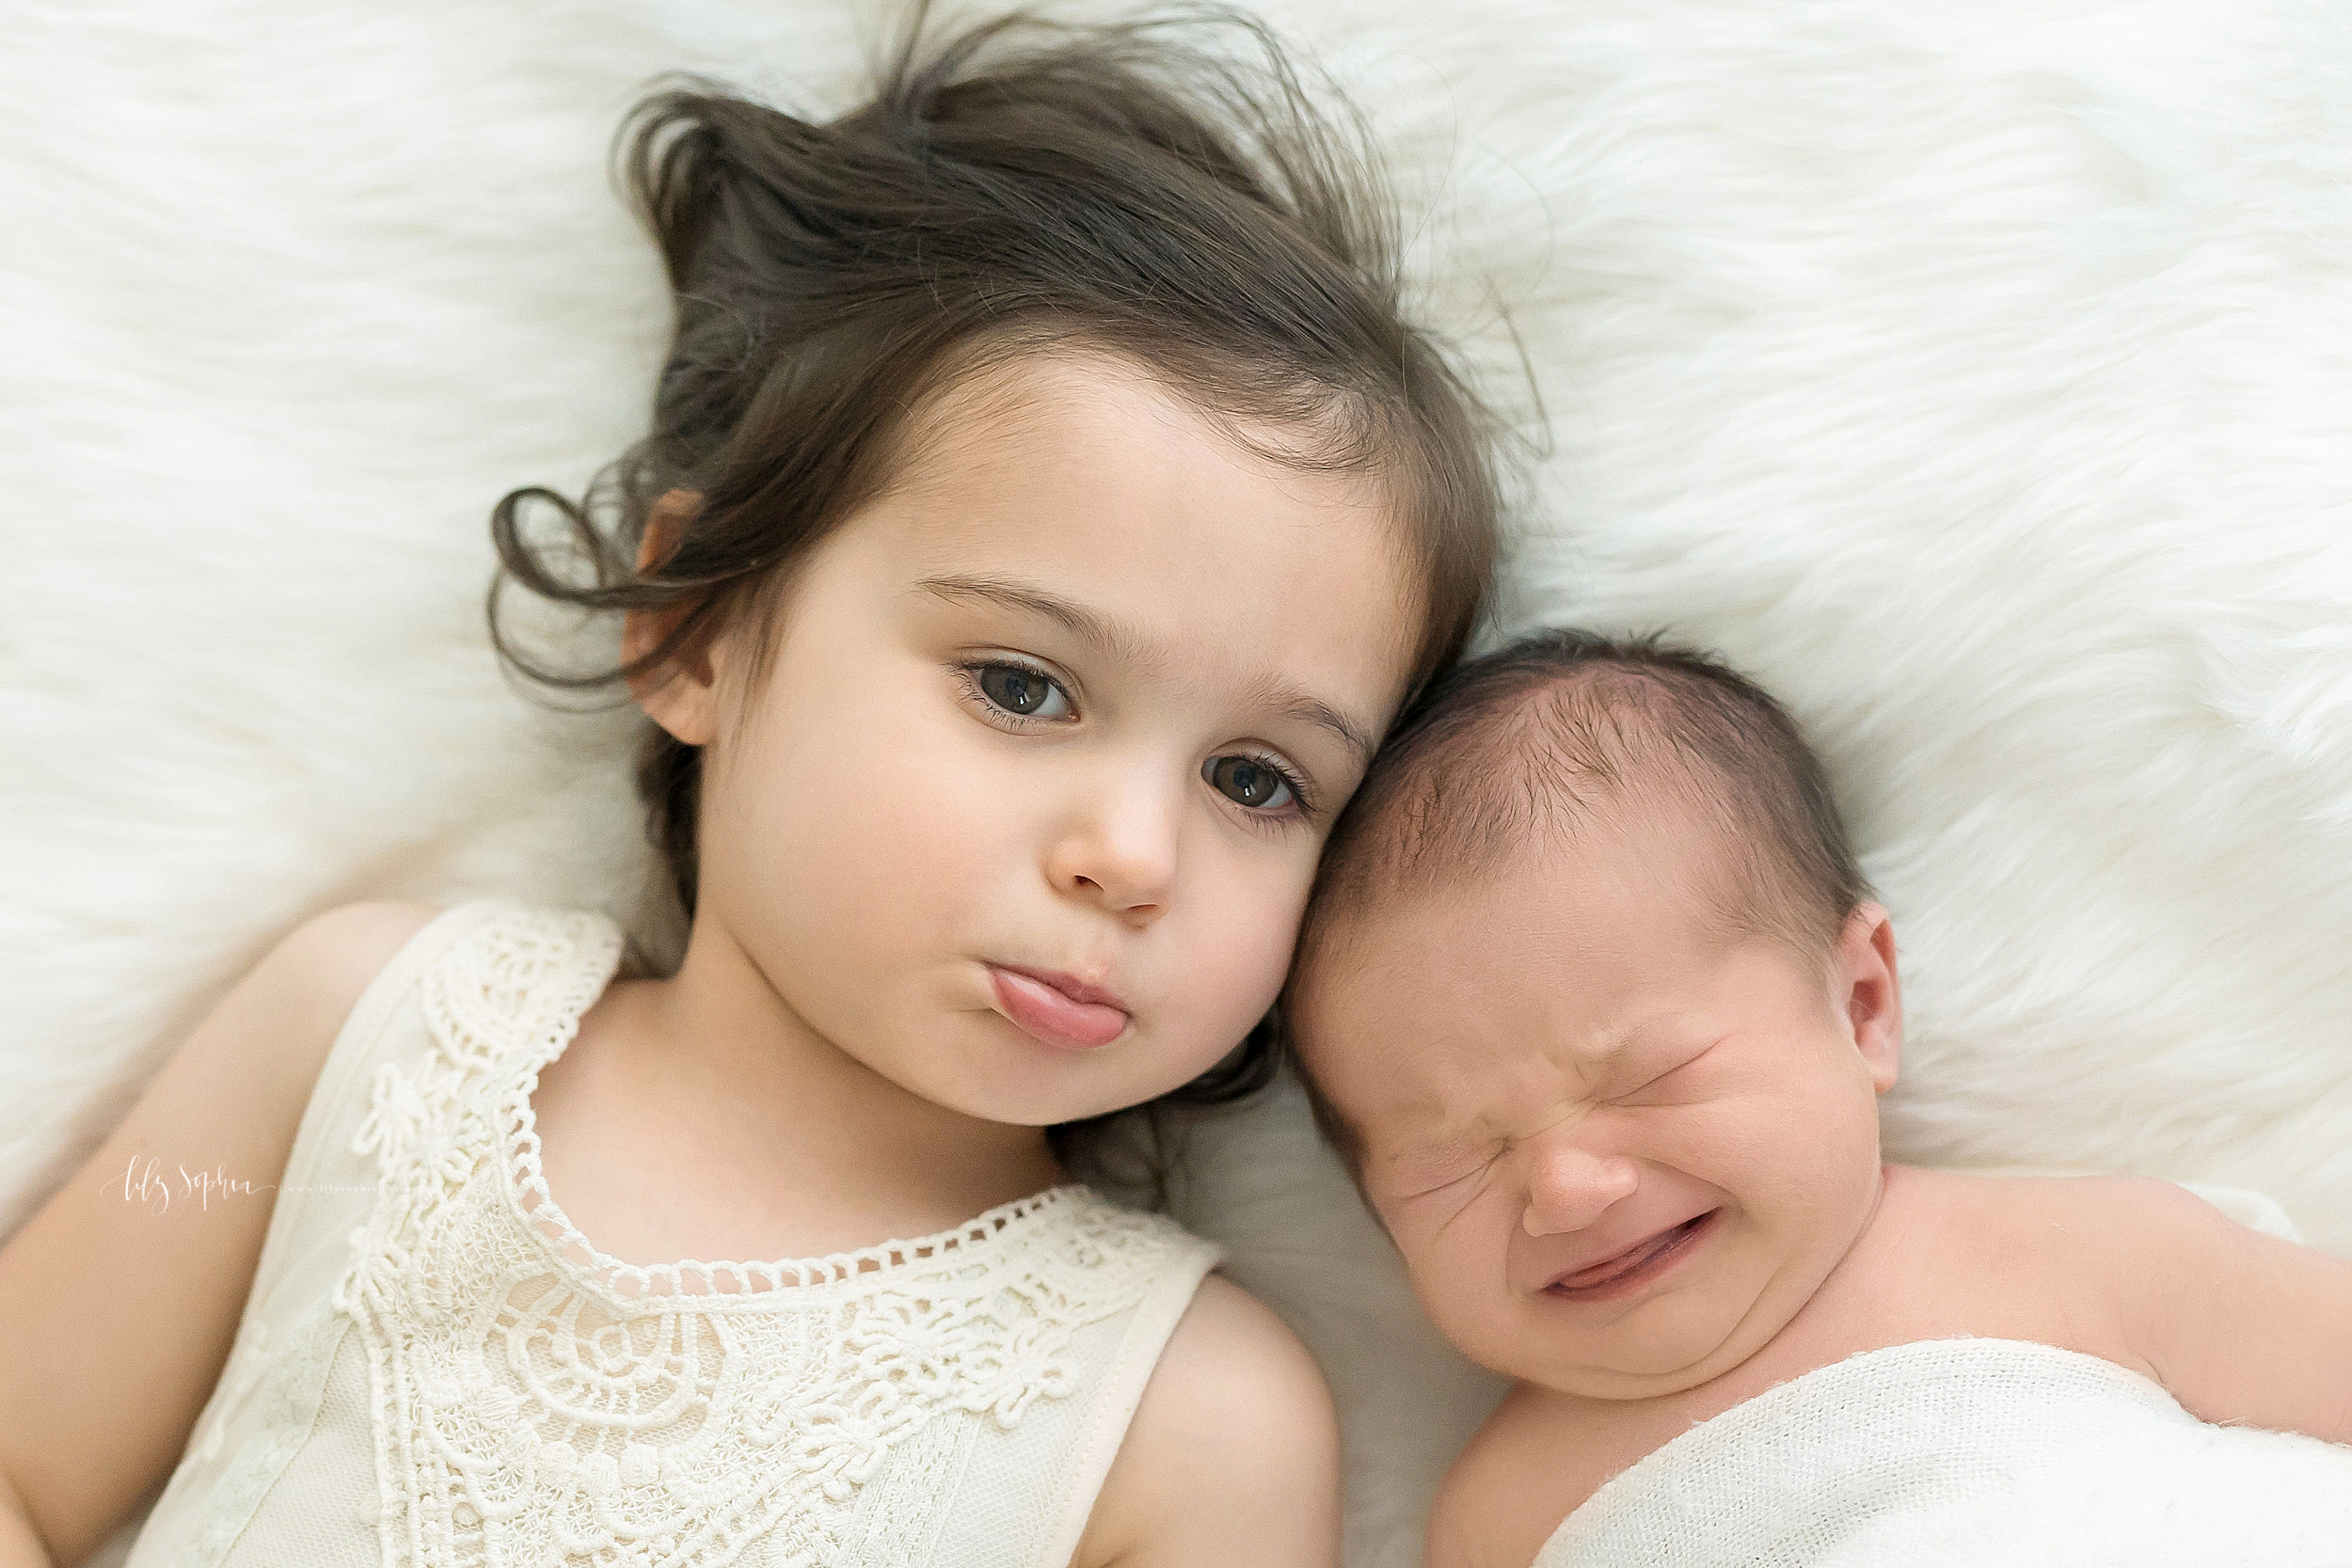  Siblings are lying next to each other on a soft white blanket.  The infant boy with brown hair is crying.  The toddler girl wearing a sleeveless white lace dress is pouting because she is sad that her brother is not happy.  